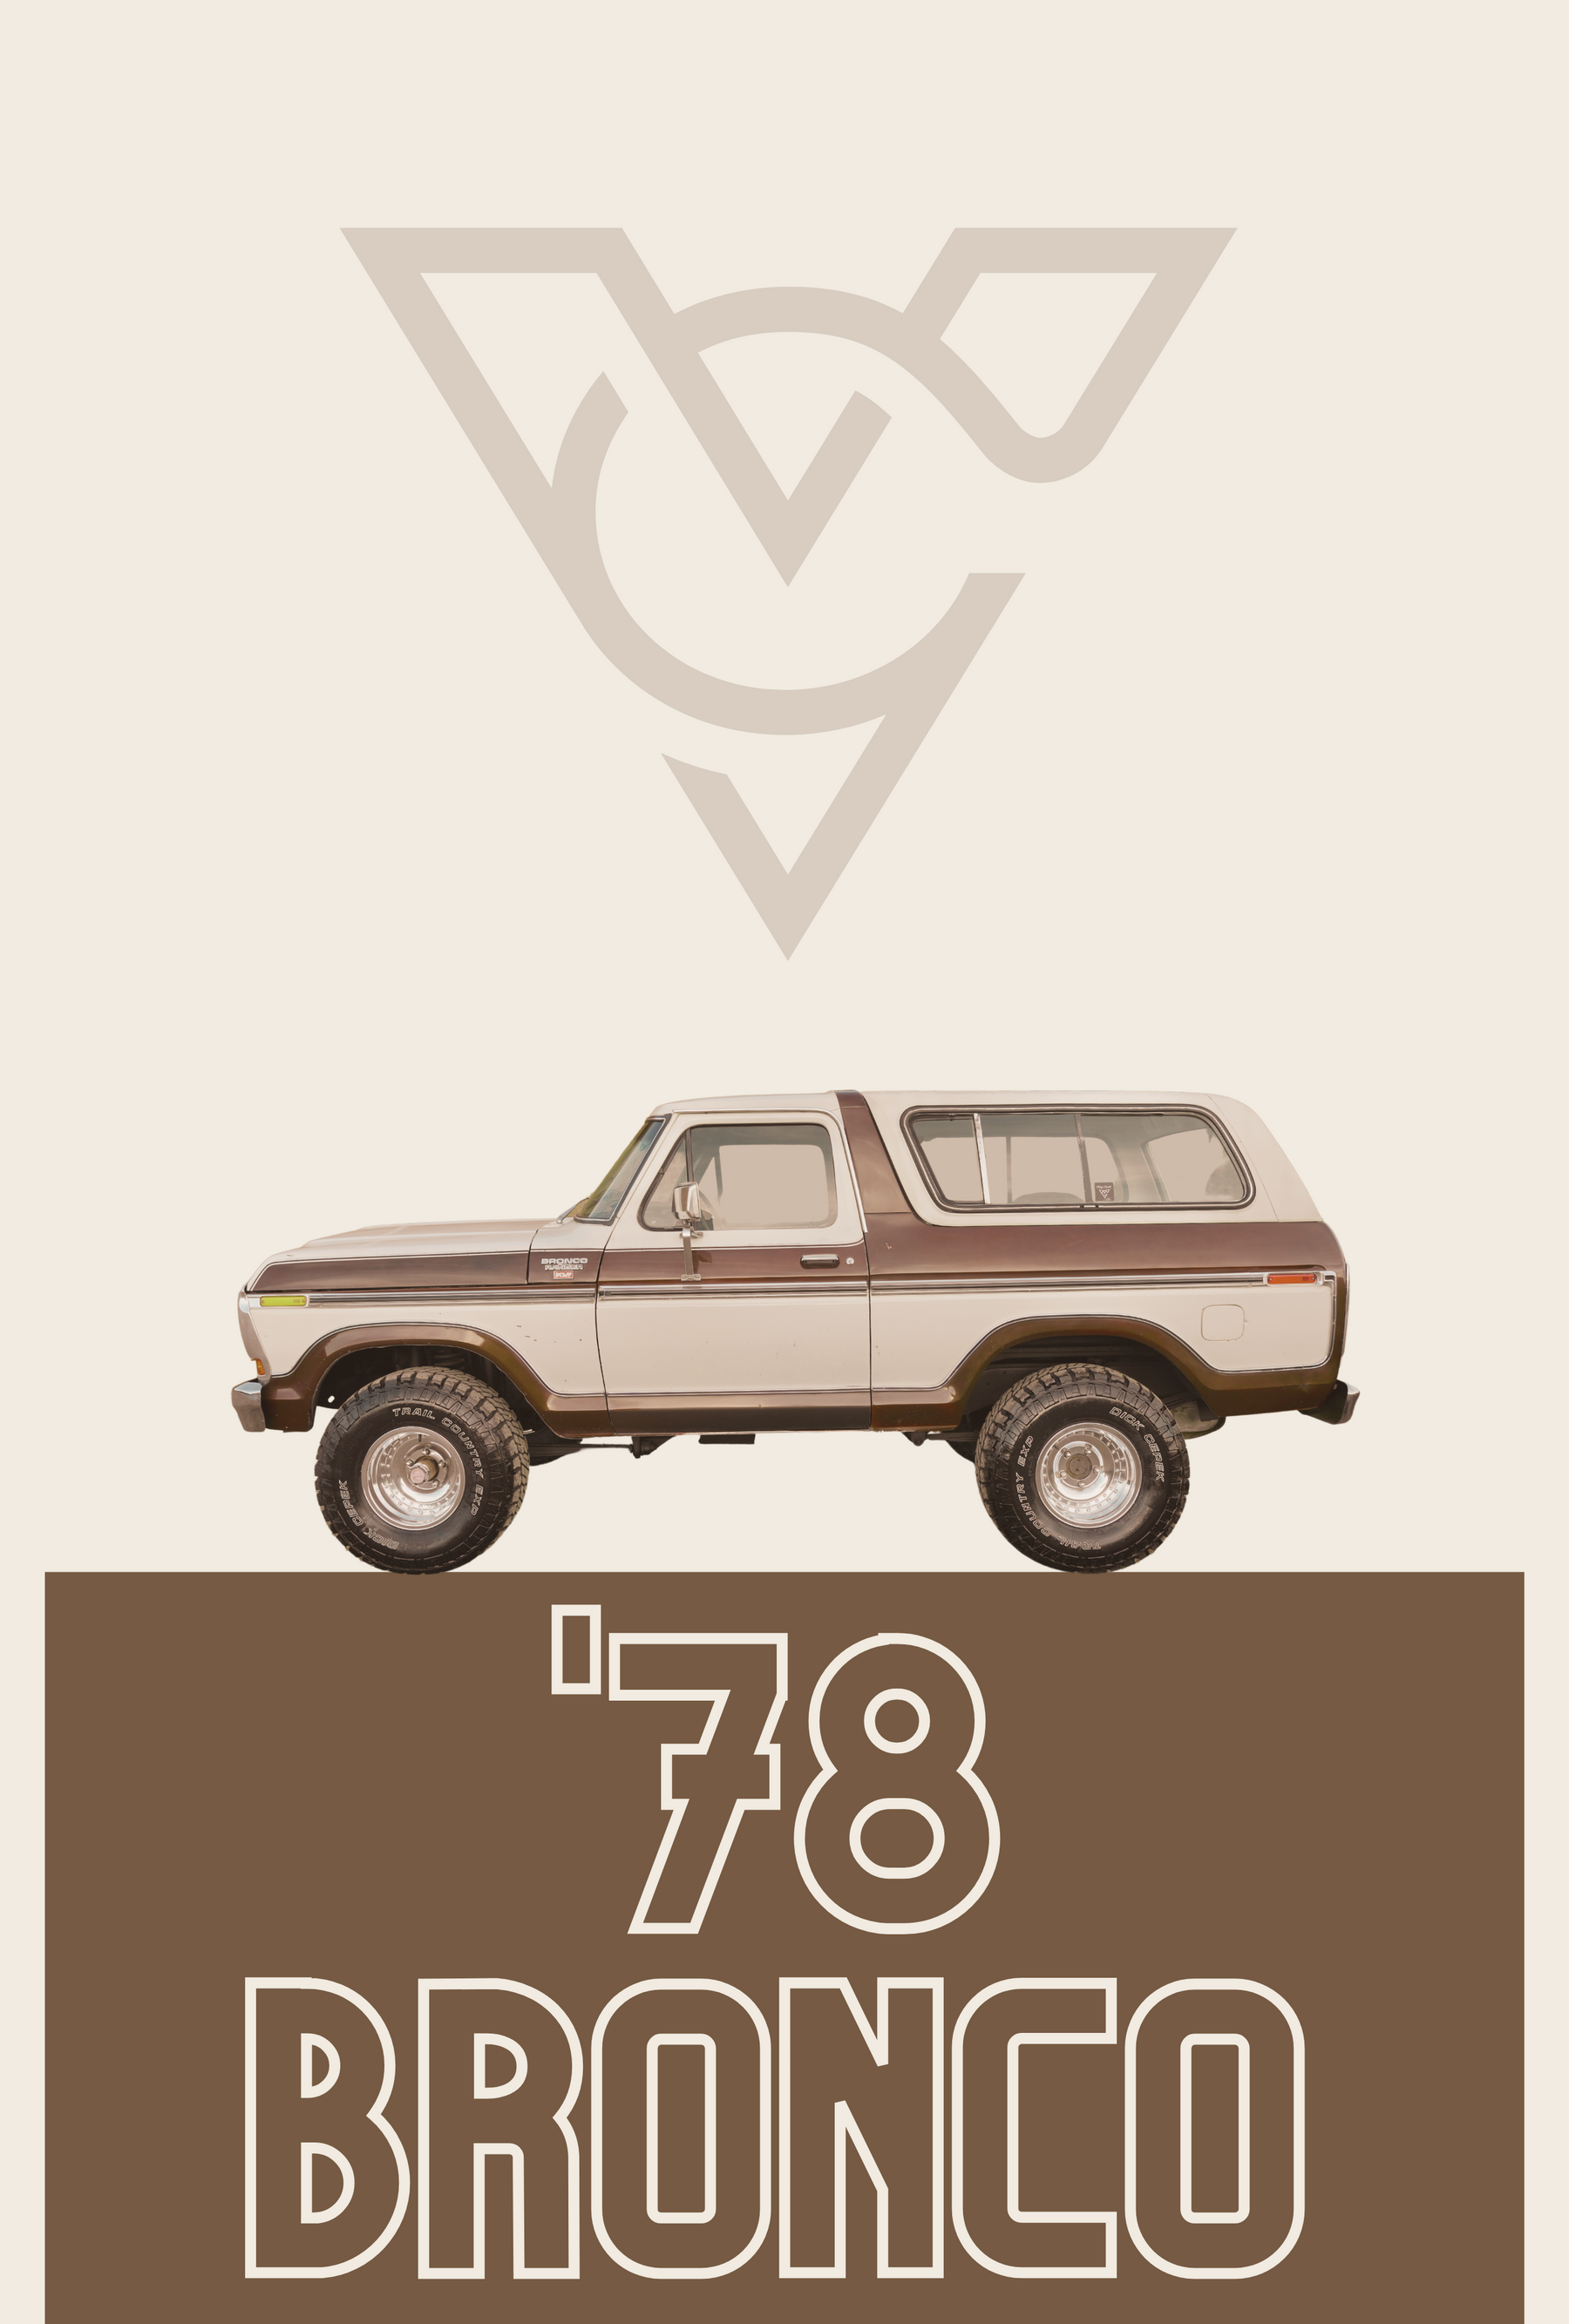 1978 Ford Bronco (Brown) (POSTER)